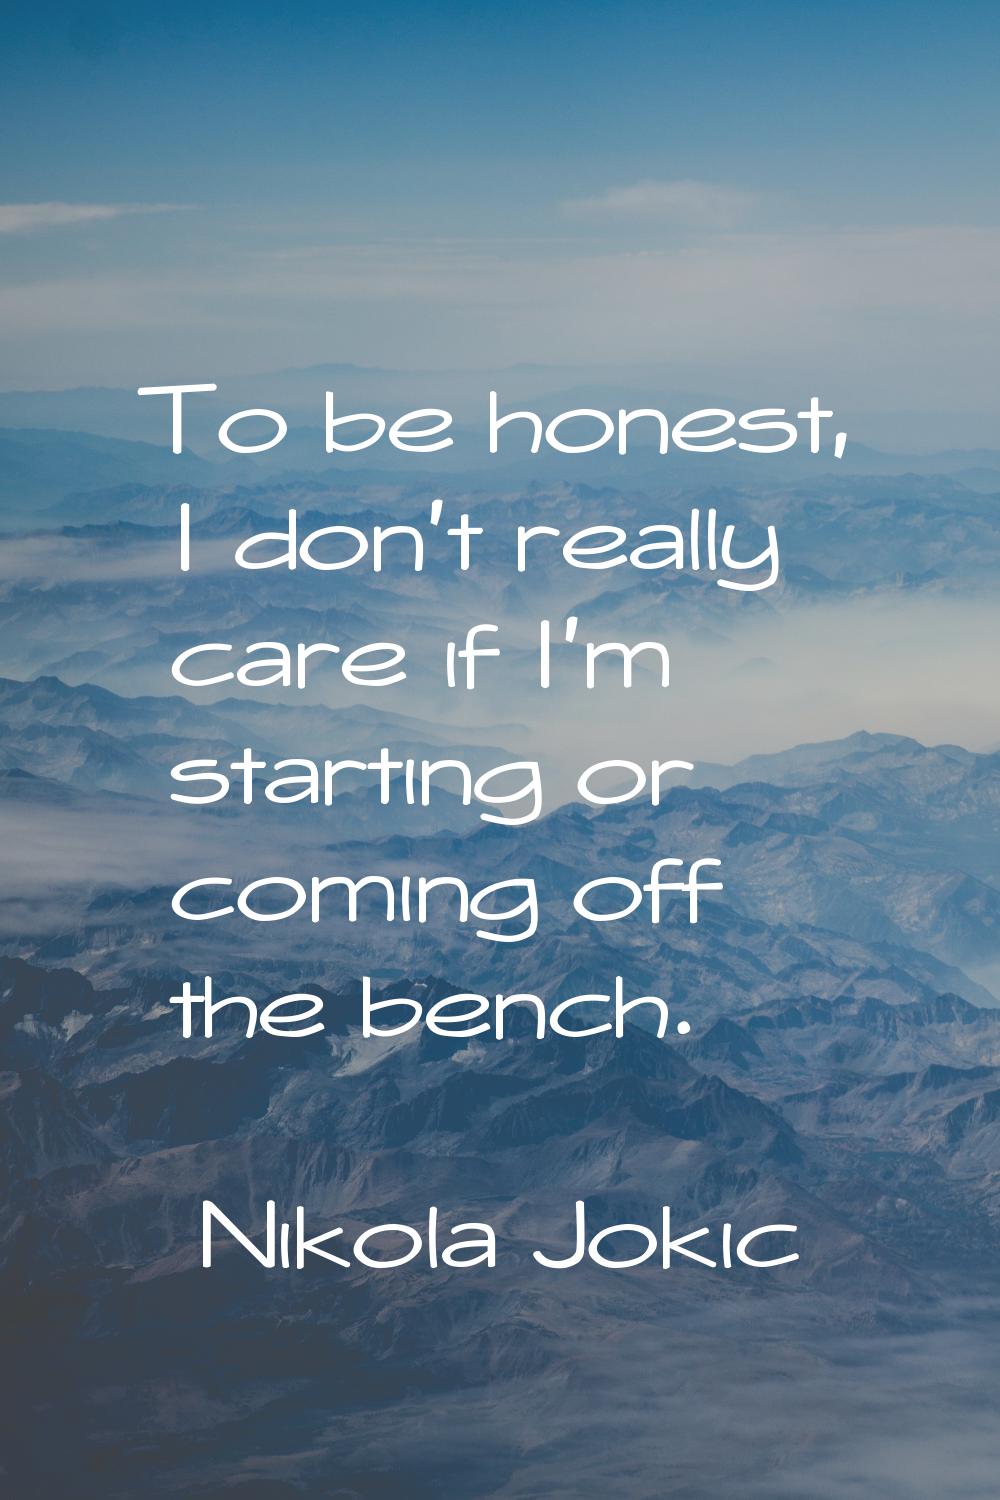 To be honest, I don't really care if I'm starting or coming off the bench.